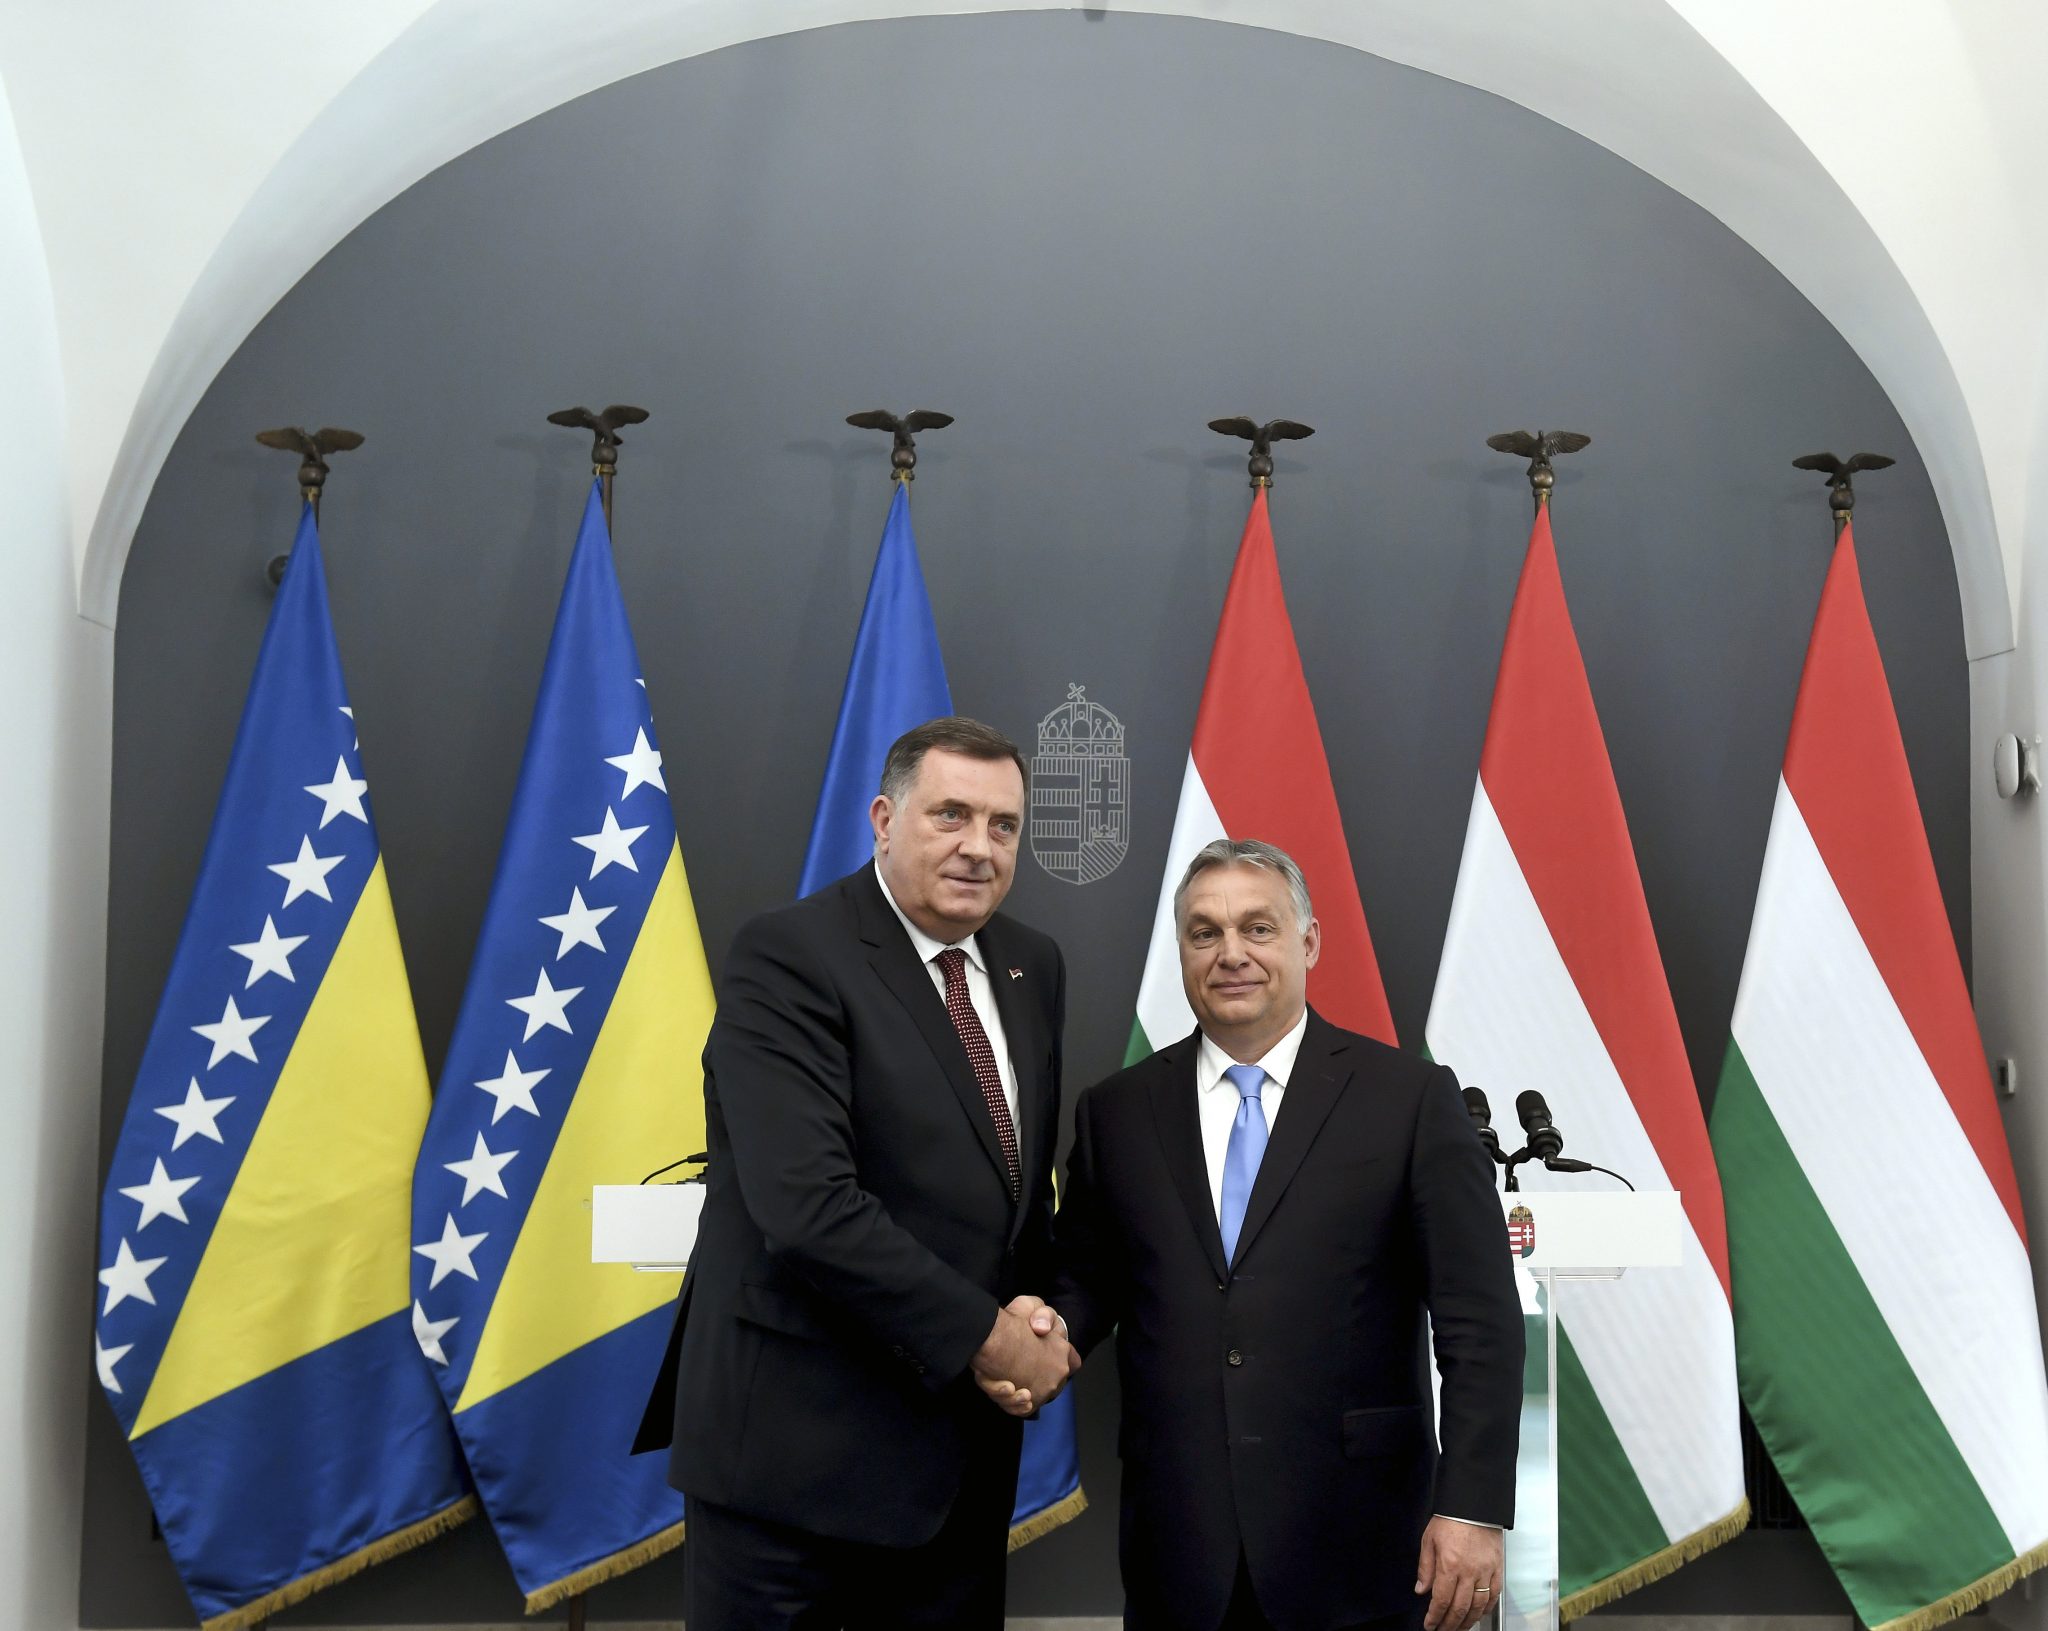 Orbán and Dodik Agree to Intensify Ties between Hungary and Republika Srpska